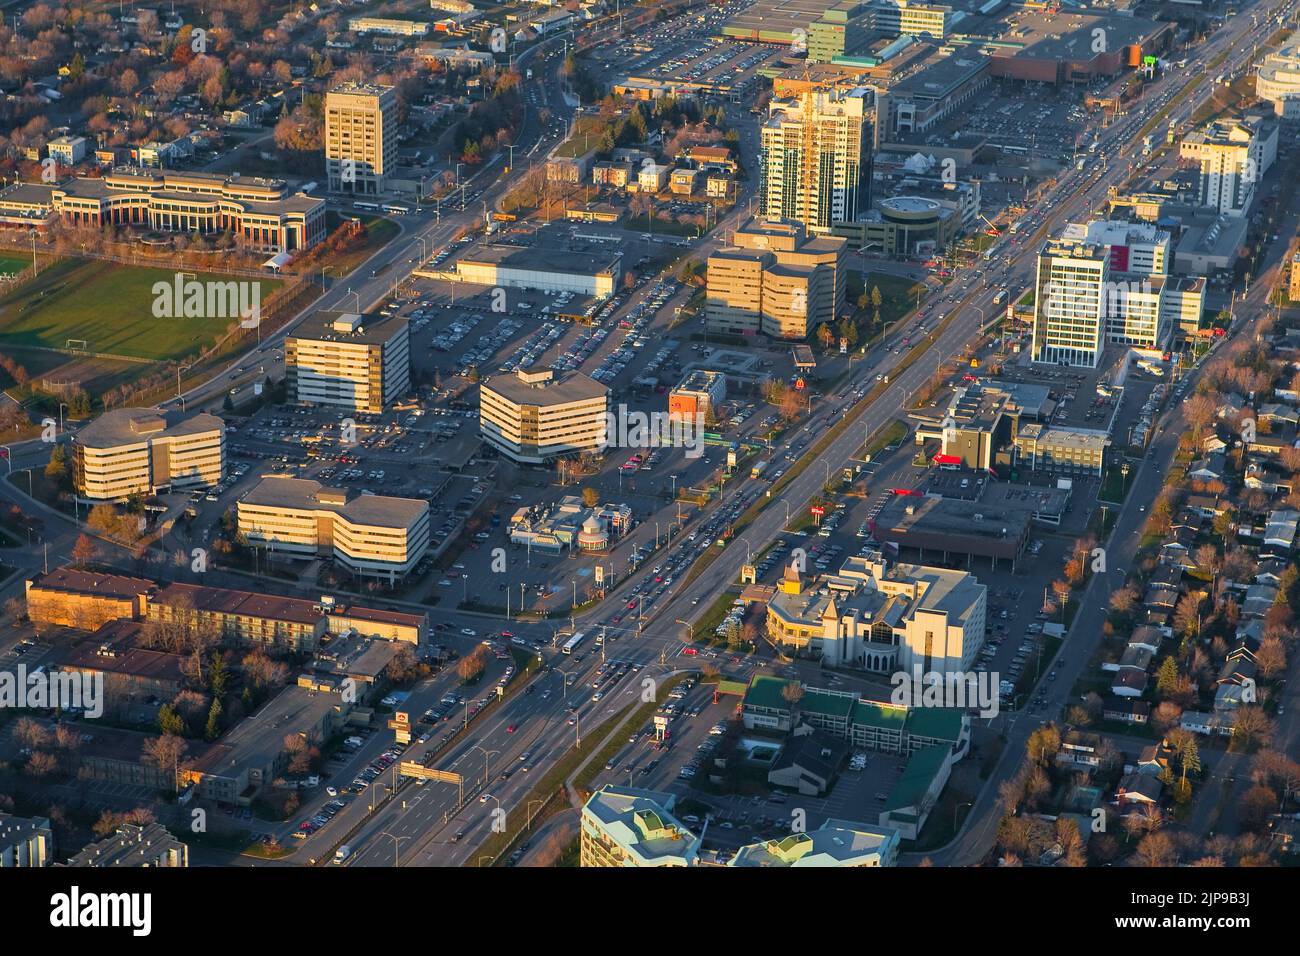 The Ste-Foy distric downtown in Quebec city is pictured in this aerial photo November 11, 2009. In this picture can be seen the Boulevard Laurier, the complexe Jules-Dallaire, Place Laurier Shopping mall, Tour Cominar tower, Place de La Cite, Complexe Delta and Place Ste-Foy. Stock Photo